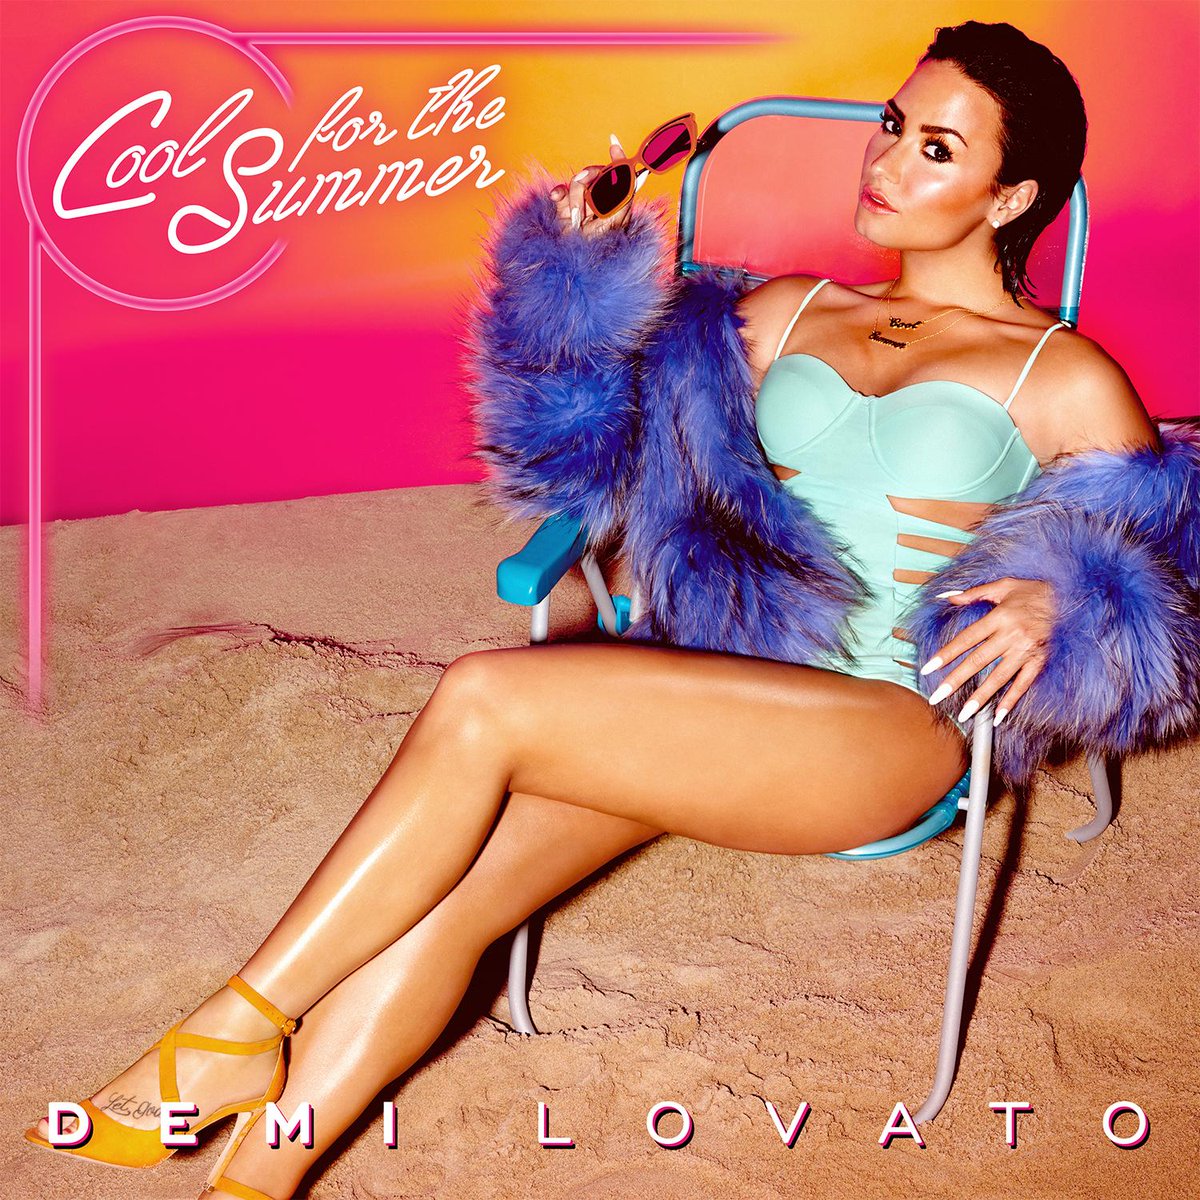 My new single is called #CoolForTheSummer and will be out July 1!!!!! AHHHHHHHHH http://t.co/8bxZ0dHHtU